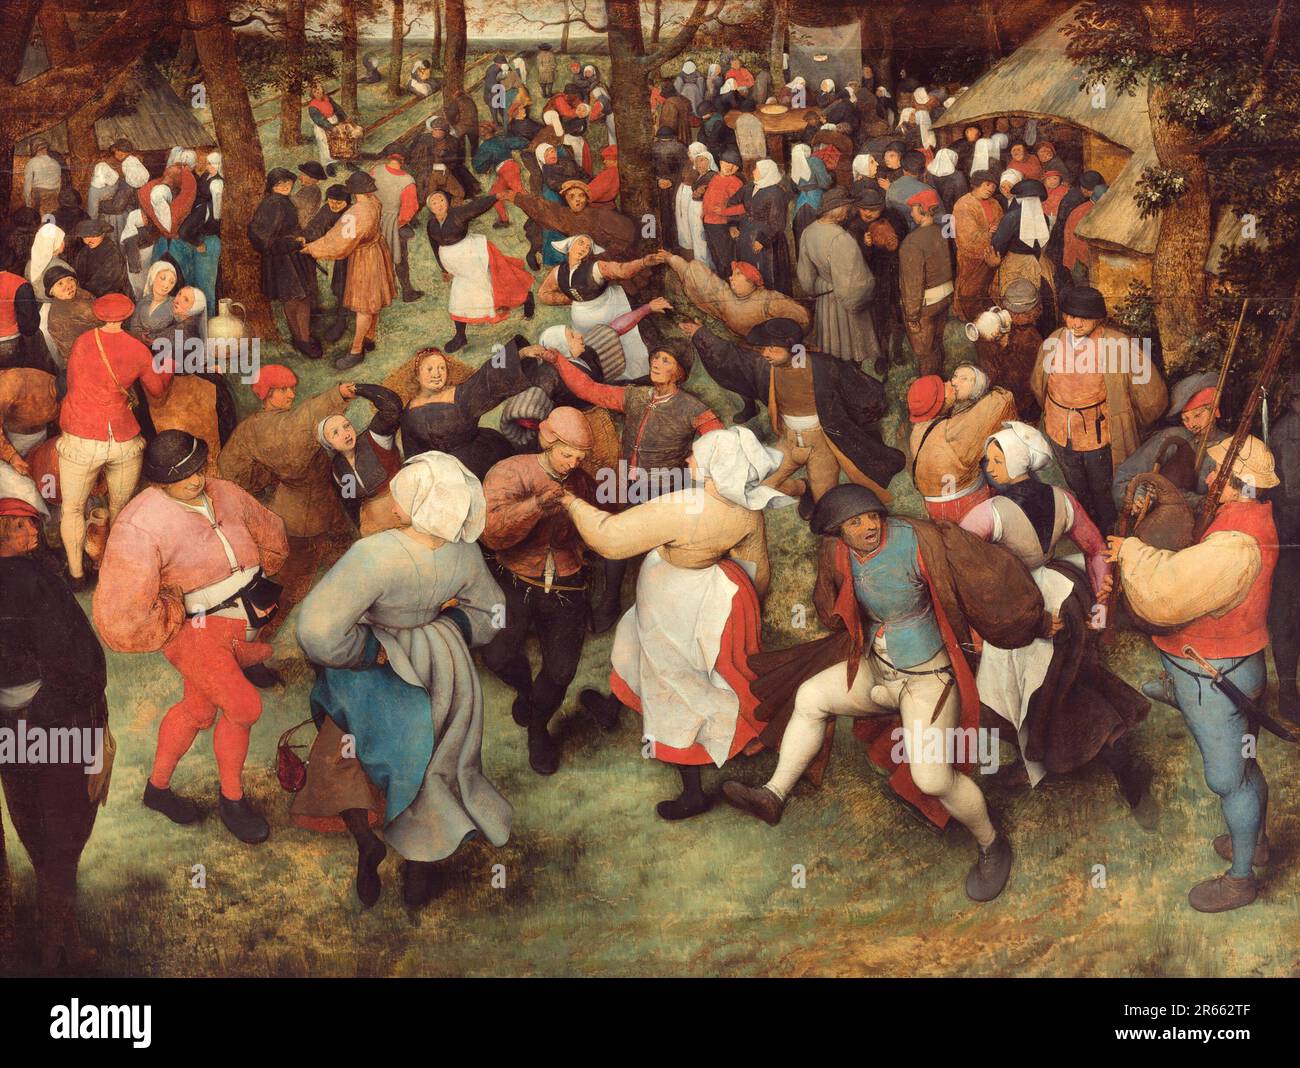 The Wedding Dance painted by the Dutch Renaissance painter Pieter Breughel the Elder in 1566. Breughel was the most important painter of the Dutch and Flemish Renaissance. His choice of subjects was influential, he rejected portraits and religious scenes in favour of local and peasant scenes. Stock Photo